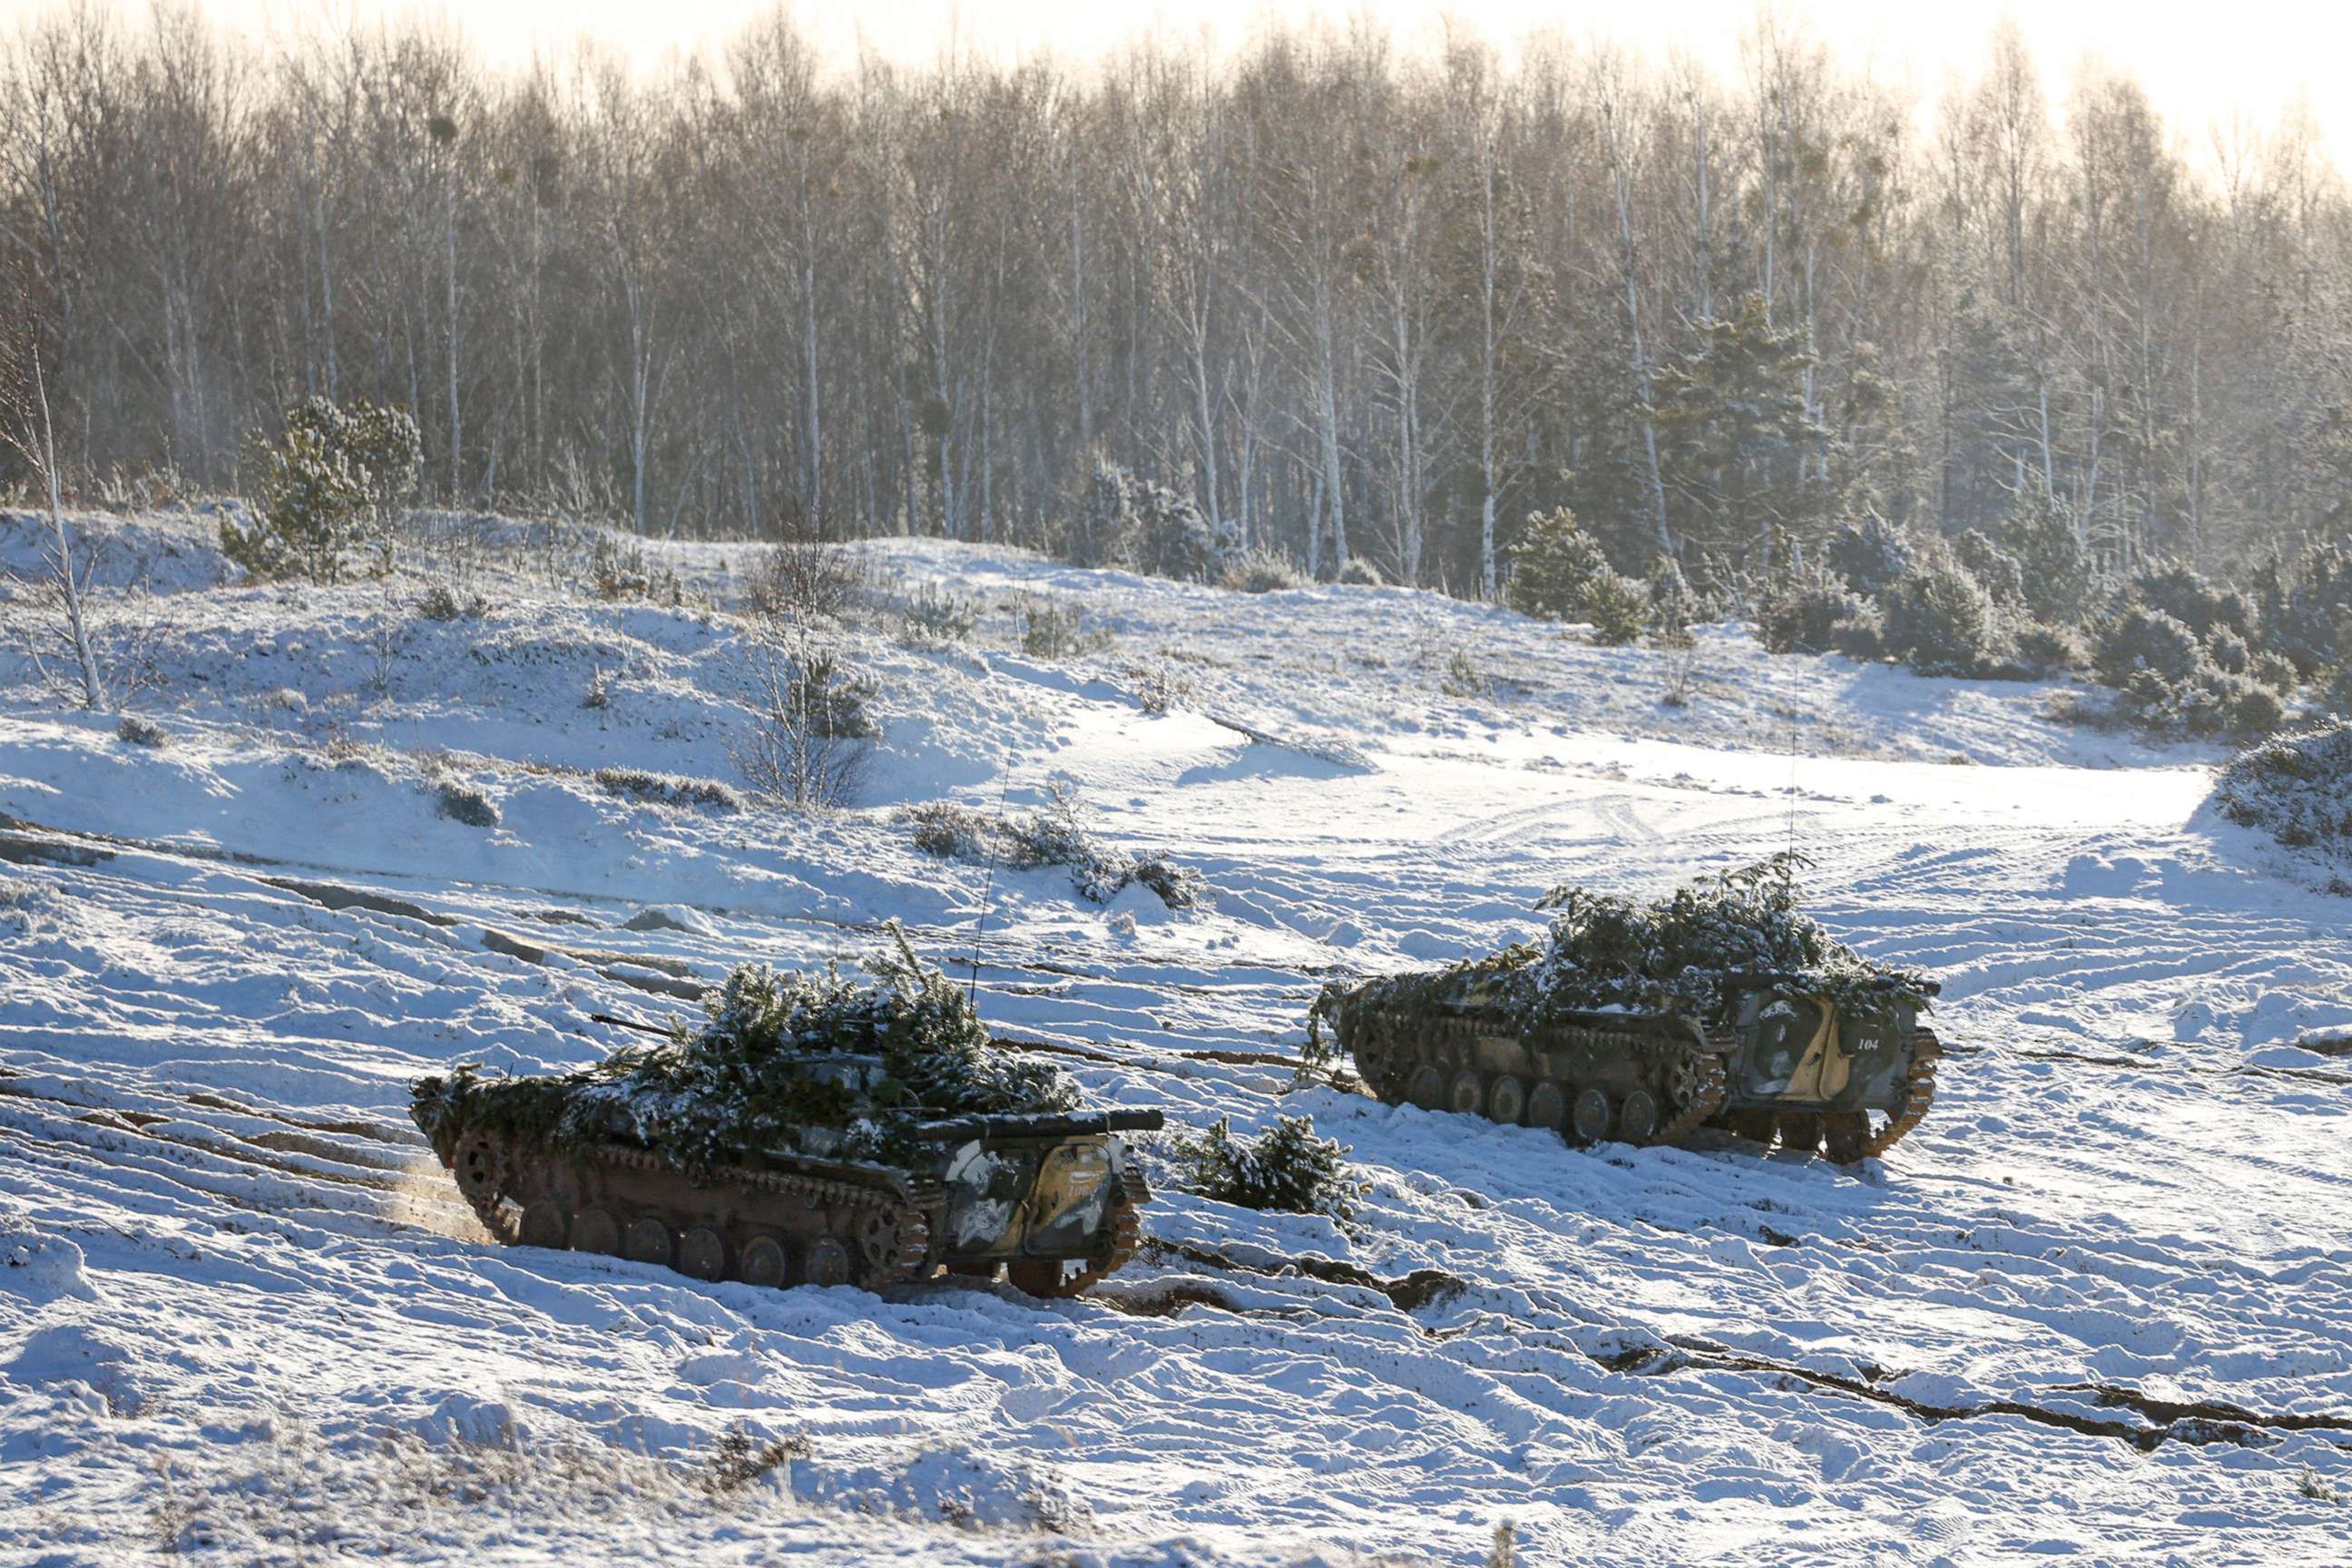 PHOTO: Armored vehicles move at the Gozhsky training ground during the Union Courage-2022 Russia-Belarus military drills in Belarus in a photo released by the Belarusian Telegraph Agency
on Feb. 12, 2022.